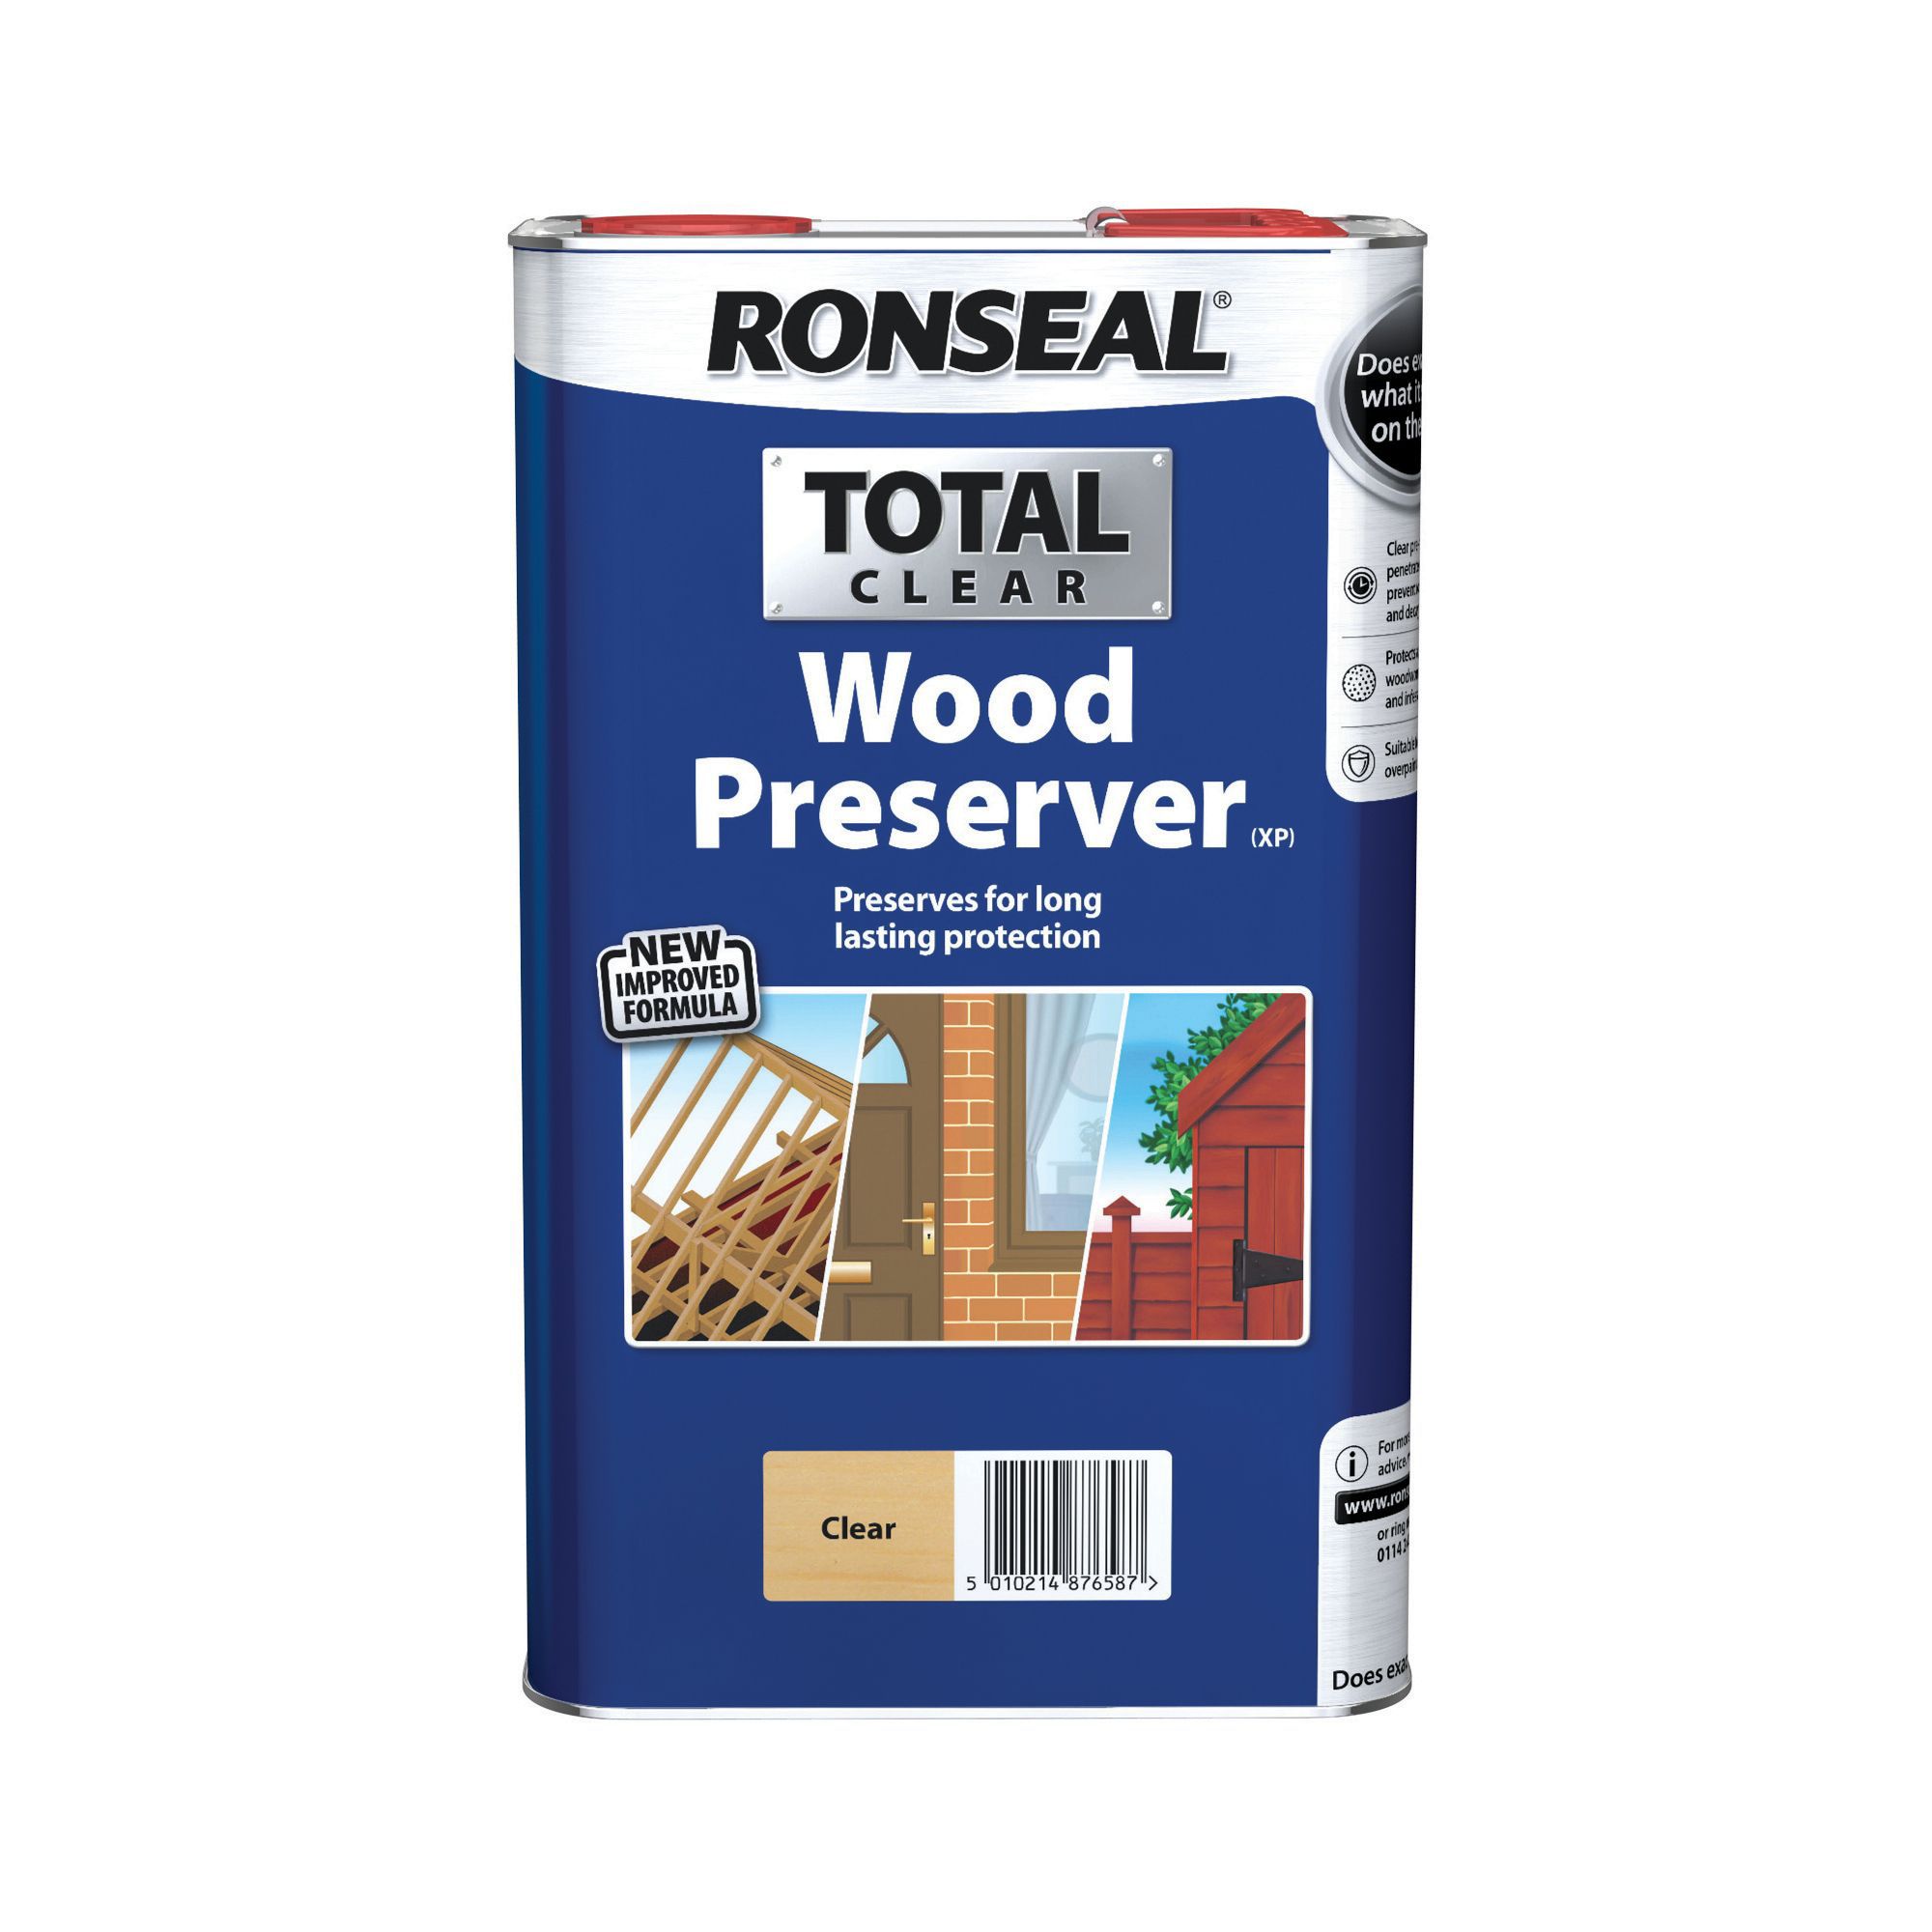 Ronseal Clear Matt Fence & shed Preserver, 5L